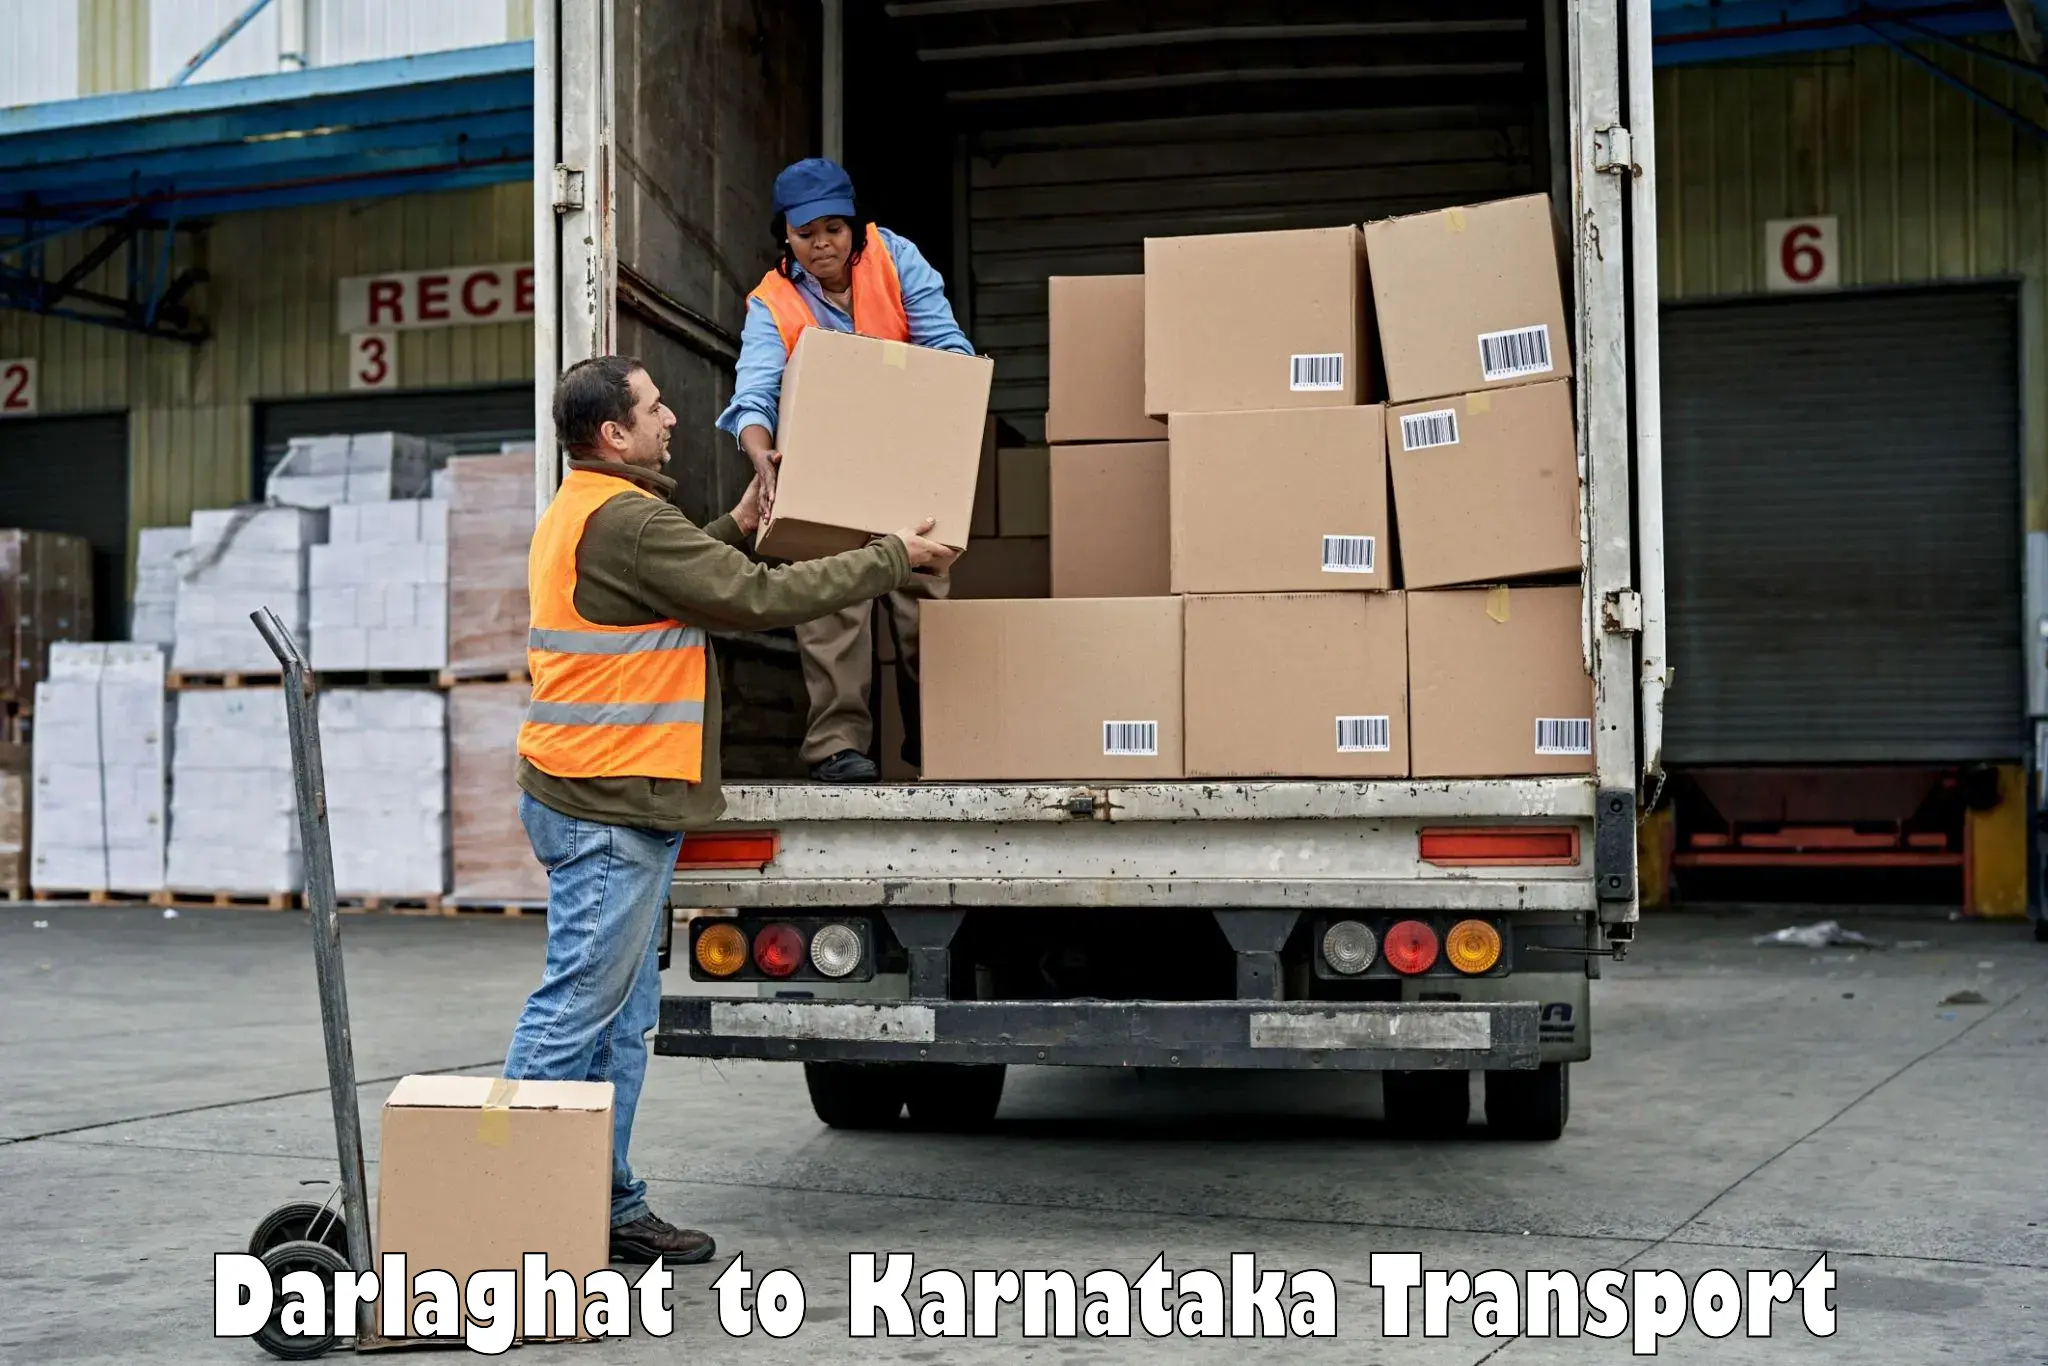 Commercial transport service Darlaghat to Nelamangala